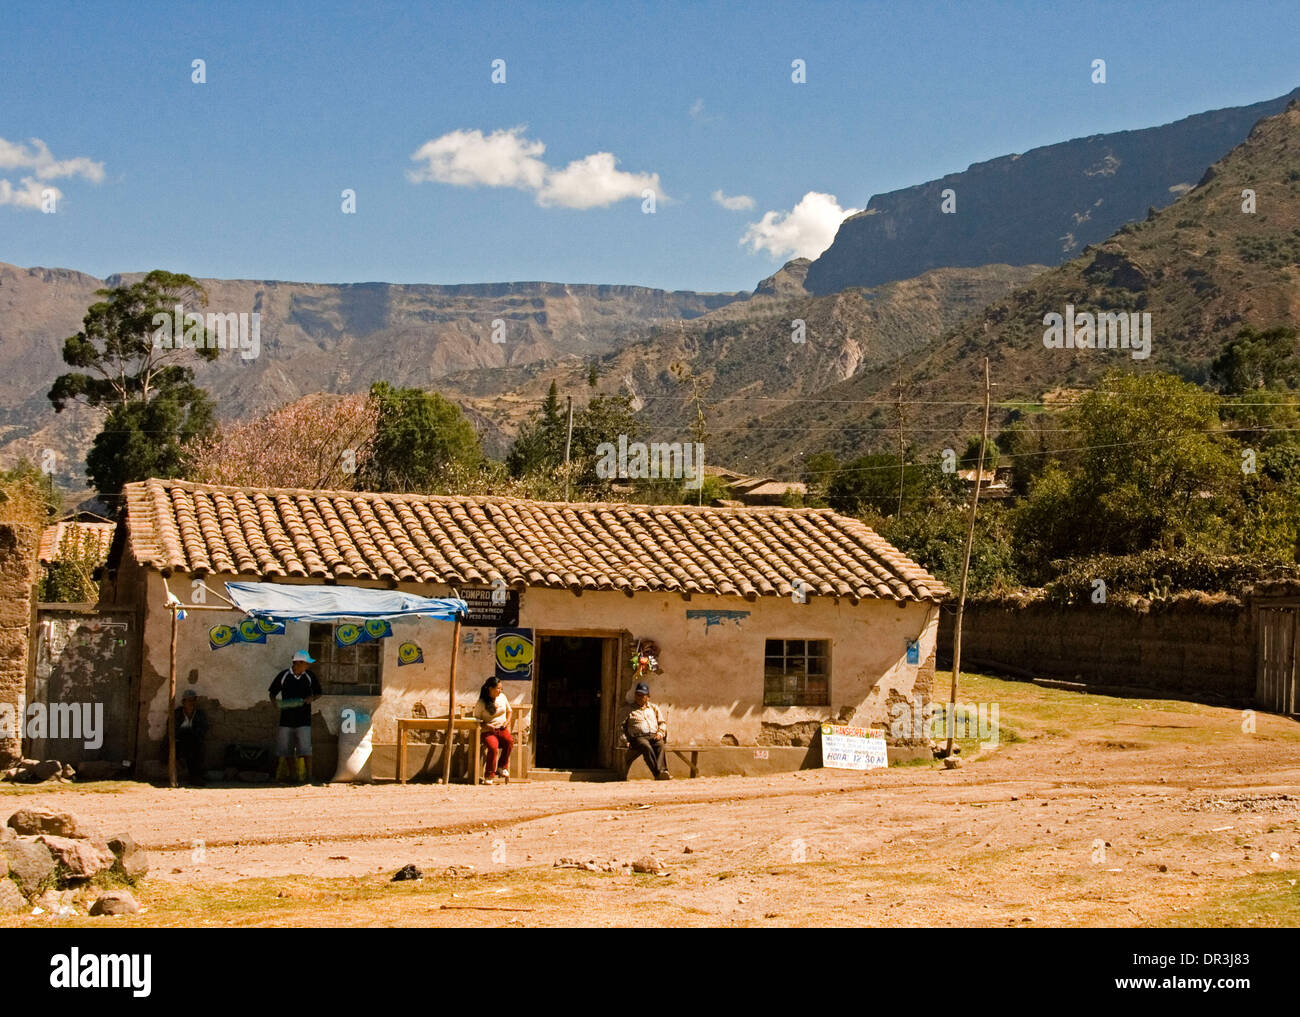 Roadside restaurant in village near Cusco Peru, simple adobe building by dirt road at foot of steep slopes of Andes Mountains Stock Photo